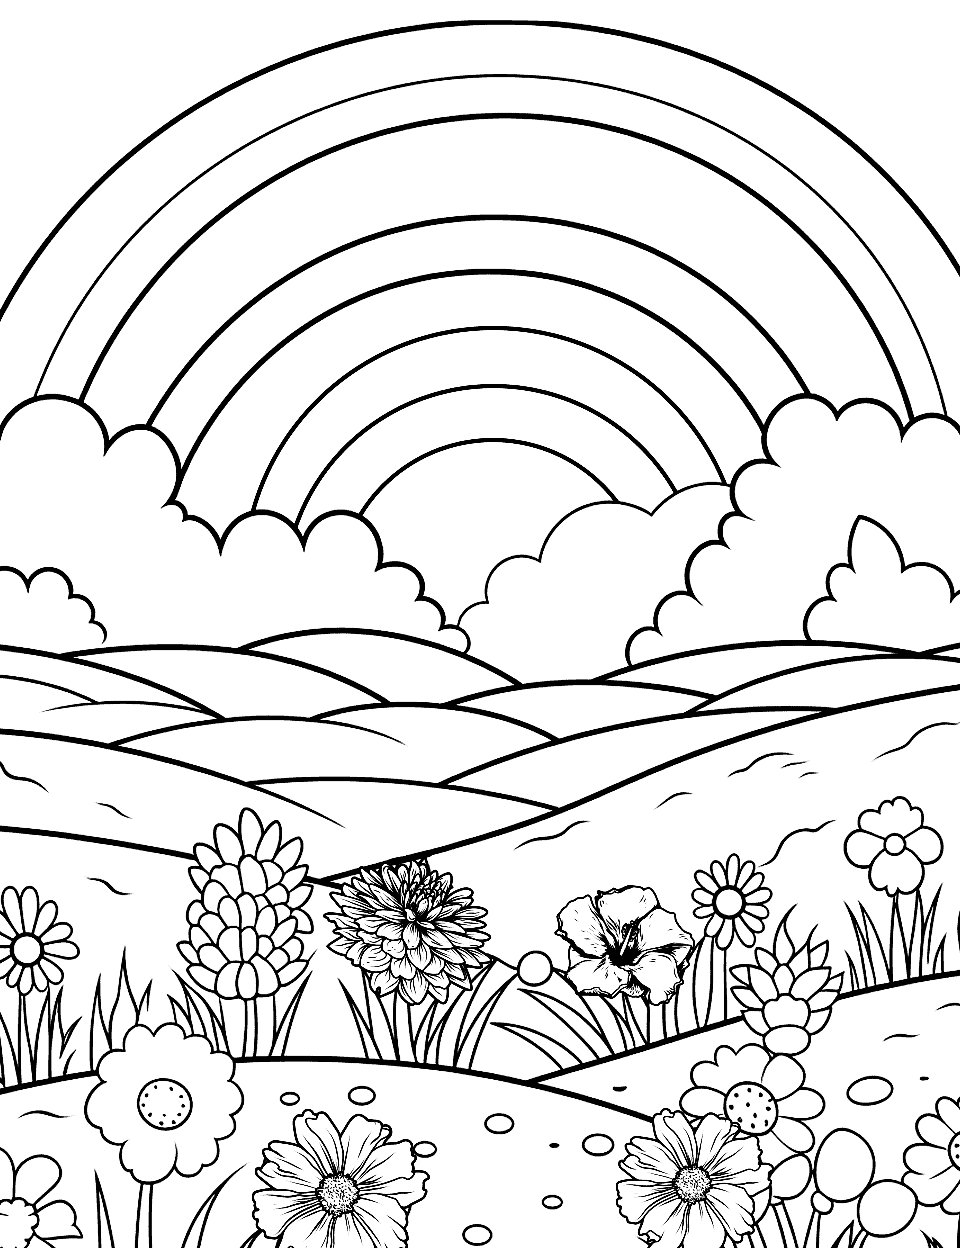 Rainbow Over a Flower Field Nature Coloring Page - A vibrant rainbow arching over a field of wildflowers.